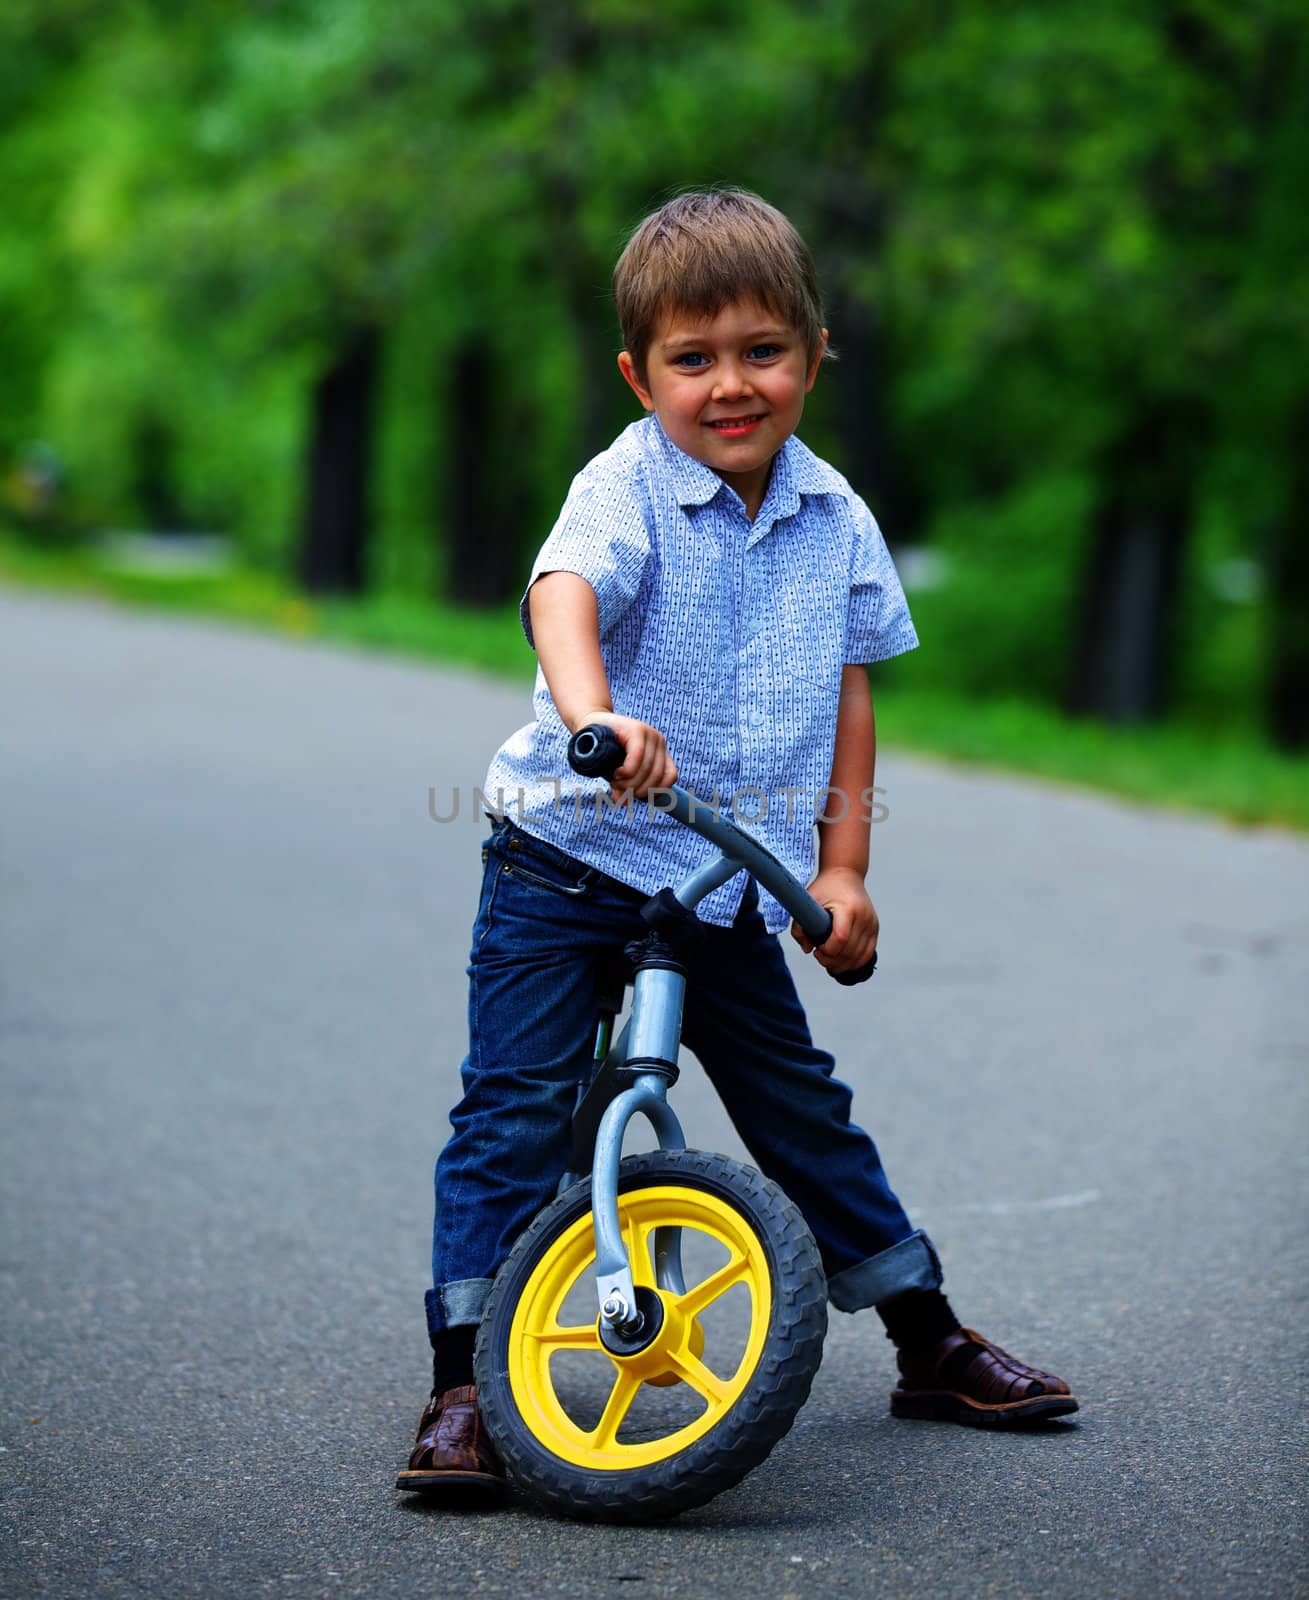 Little boy on a bicycle by maxoliki